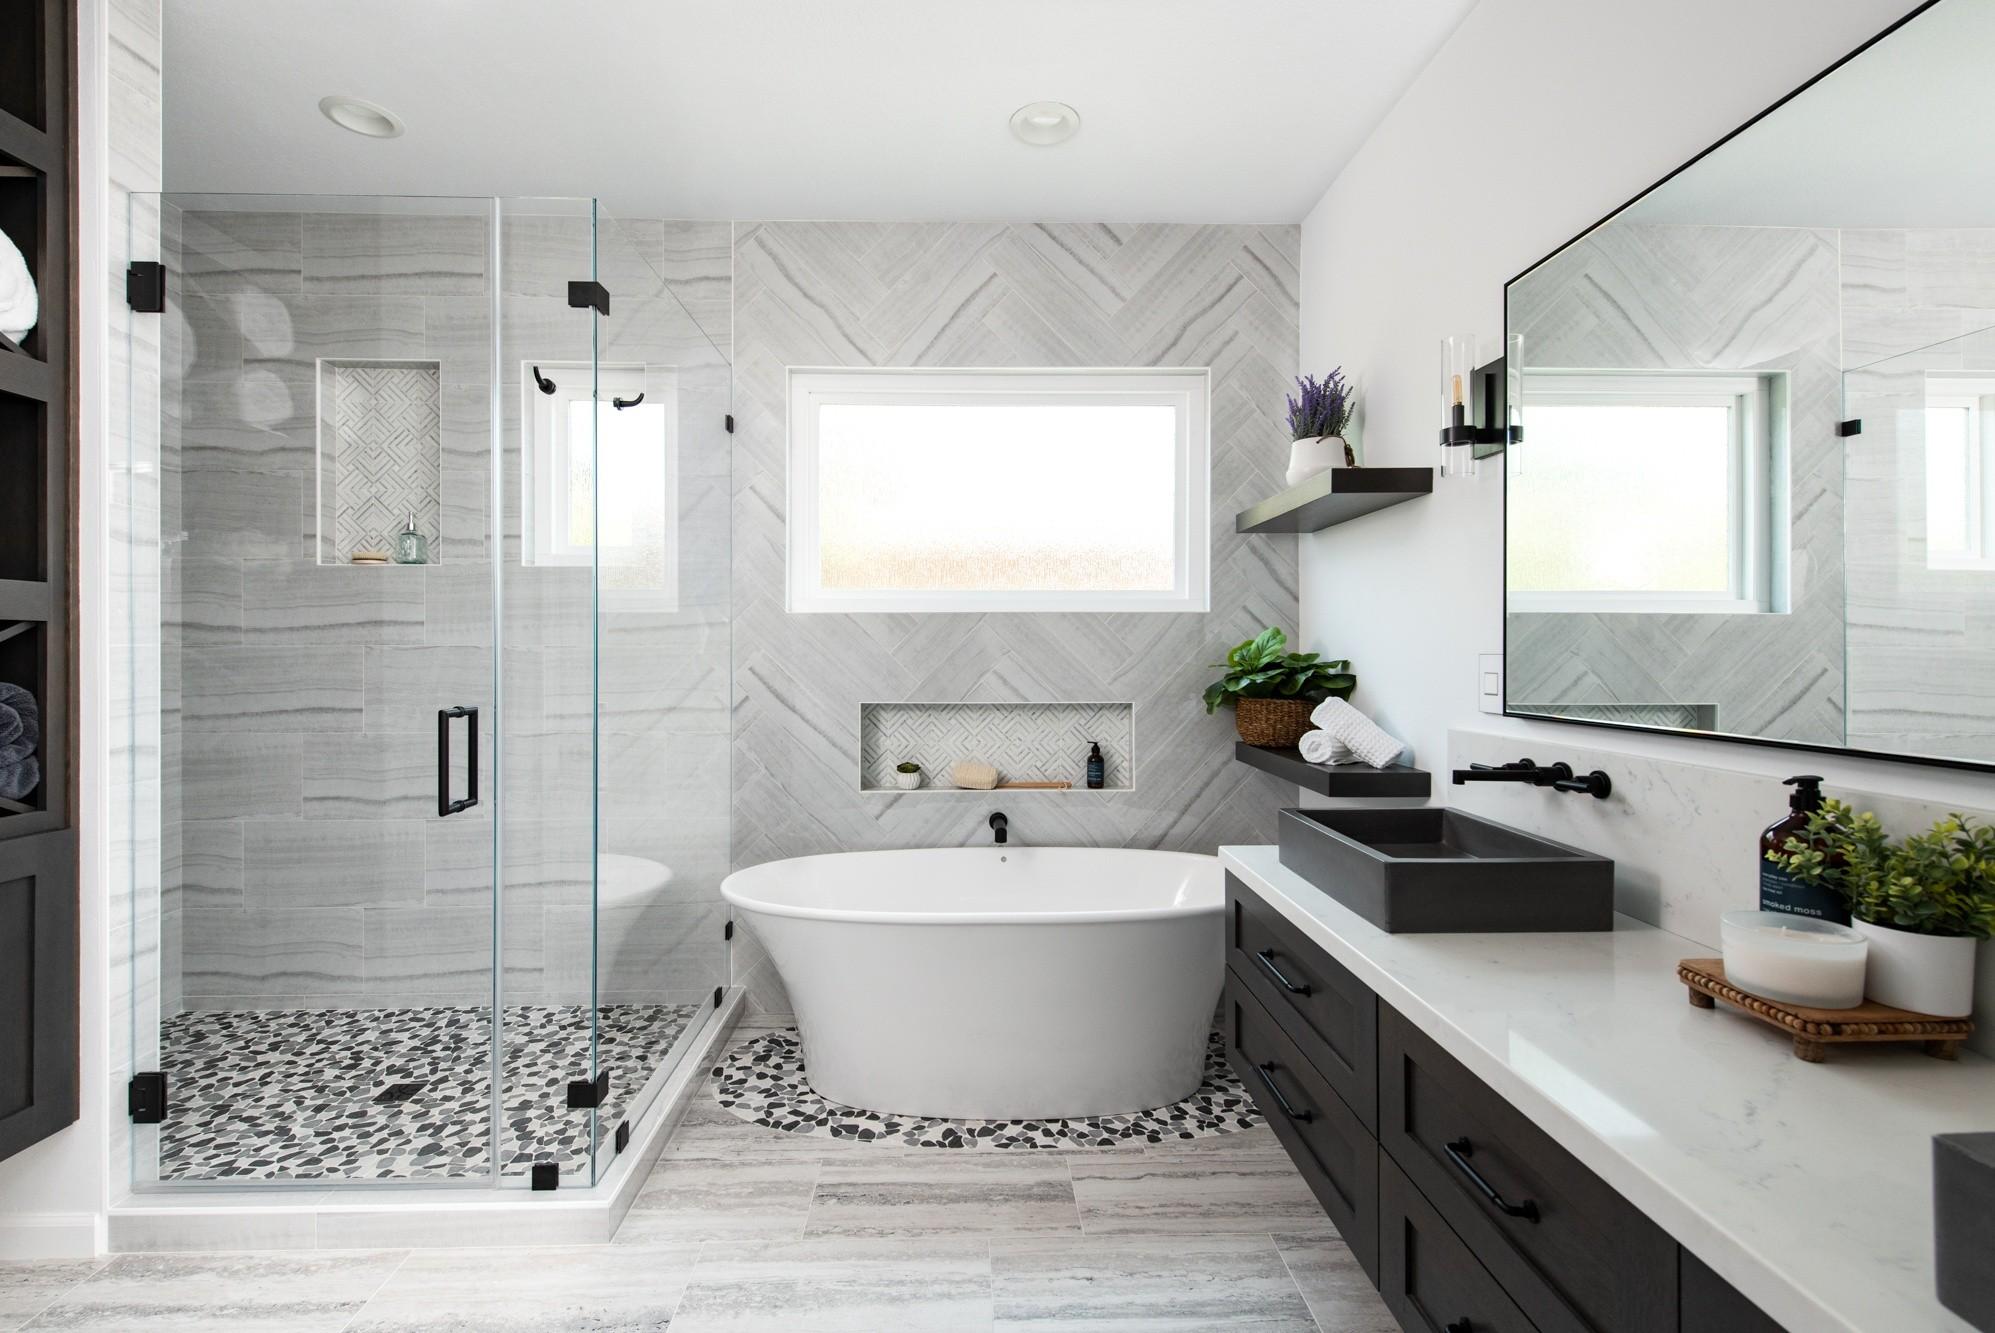 Reasons why Homeowners Hire Professionals to Model their Bathrooms in Sunny Coast